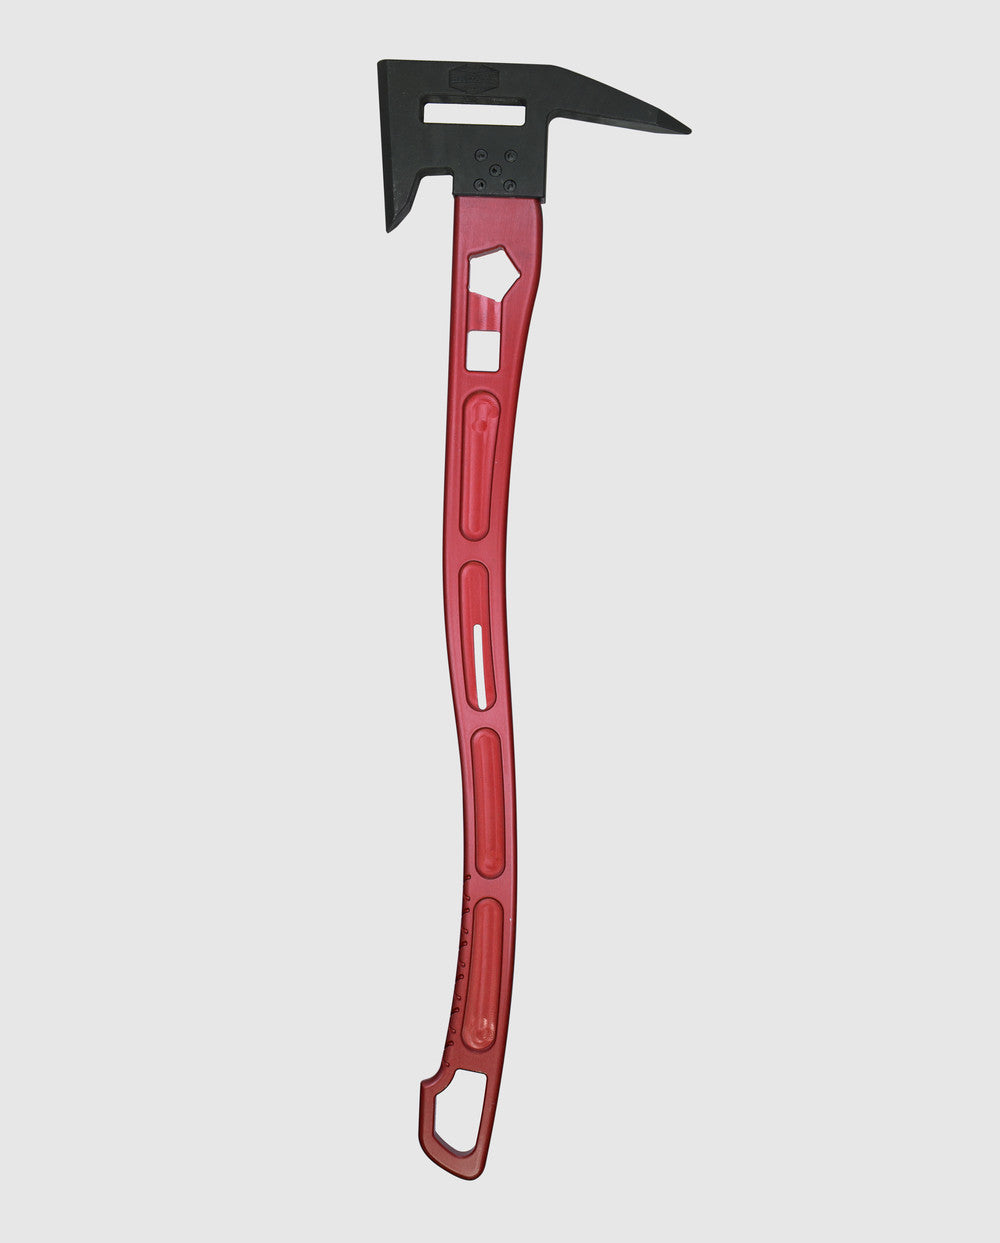 fire fighting axes